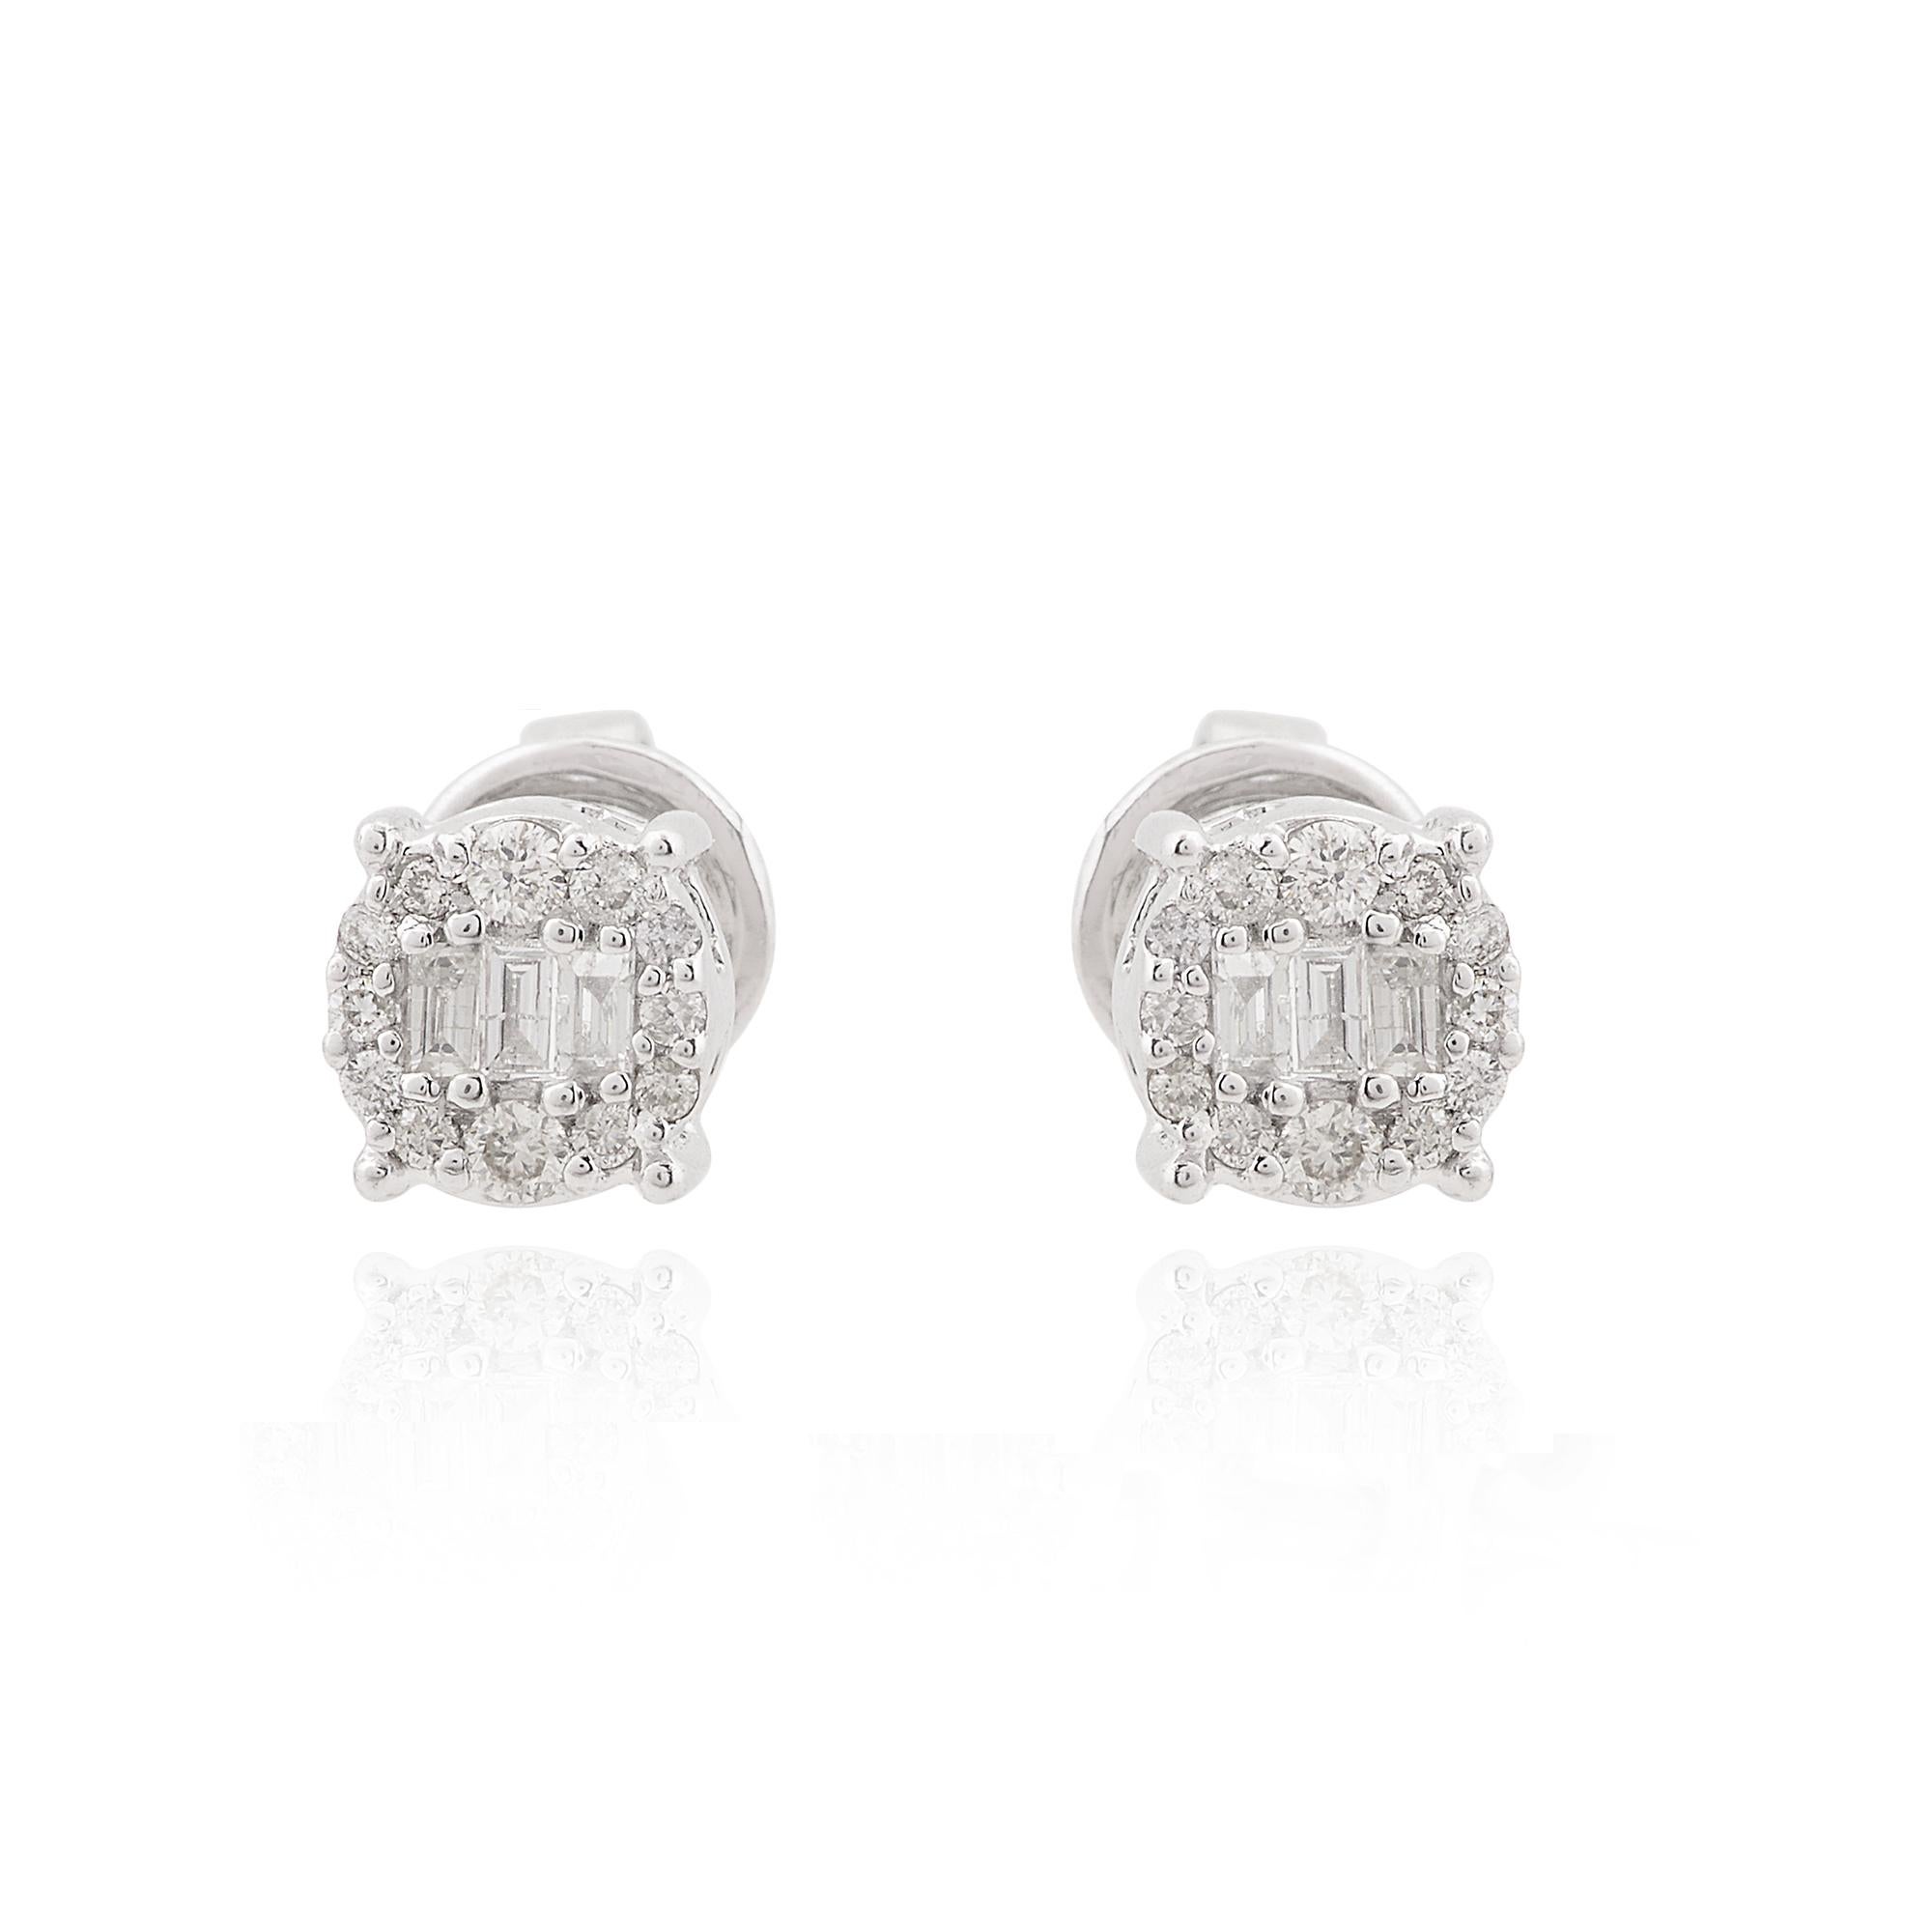 Item Code :- STE-1069
Gross Wt. :- 1.45 gm
10k White Gold Wt. :- 1.40 gm
Natural Diamond Wt. :- 0.23 Ct. ( AVERAGE DIAMOND CLARITY SI1-SI2 & COLOR H-I )
Earrings Size :- 6 mm approx.

✦ Sizing
.....................
We can adjust most items to fit